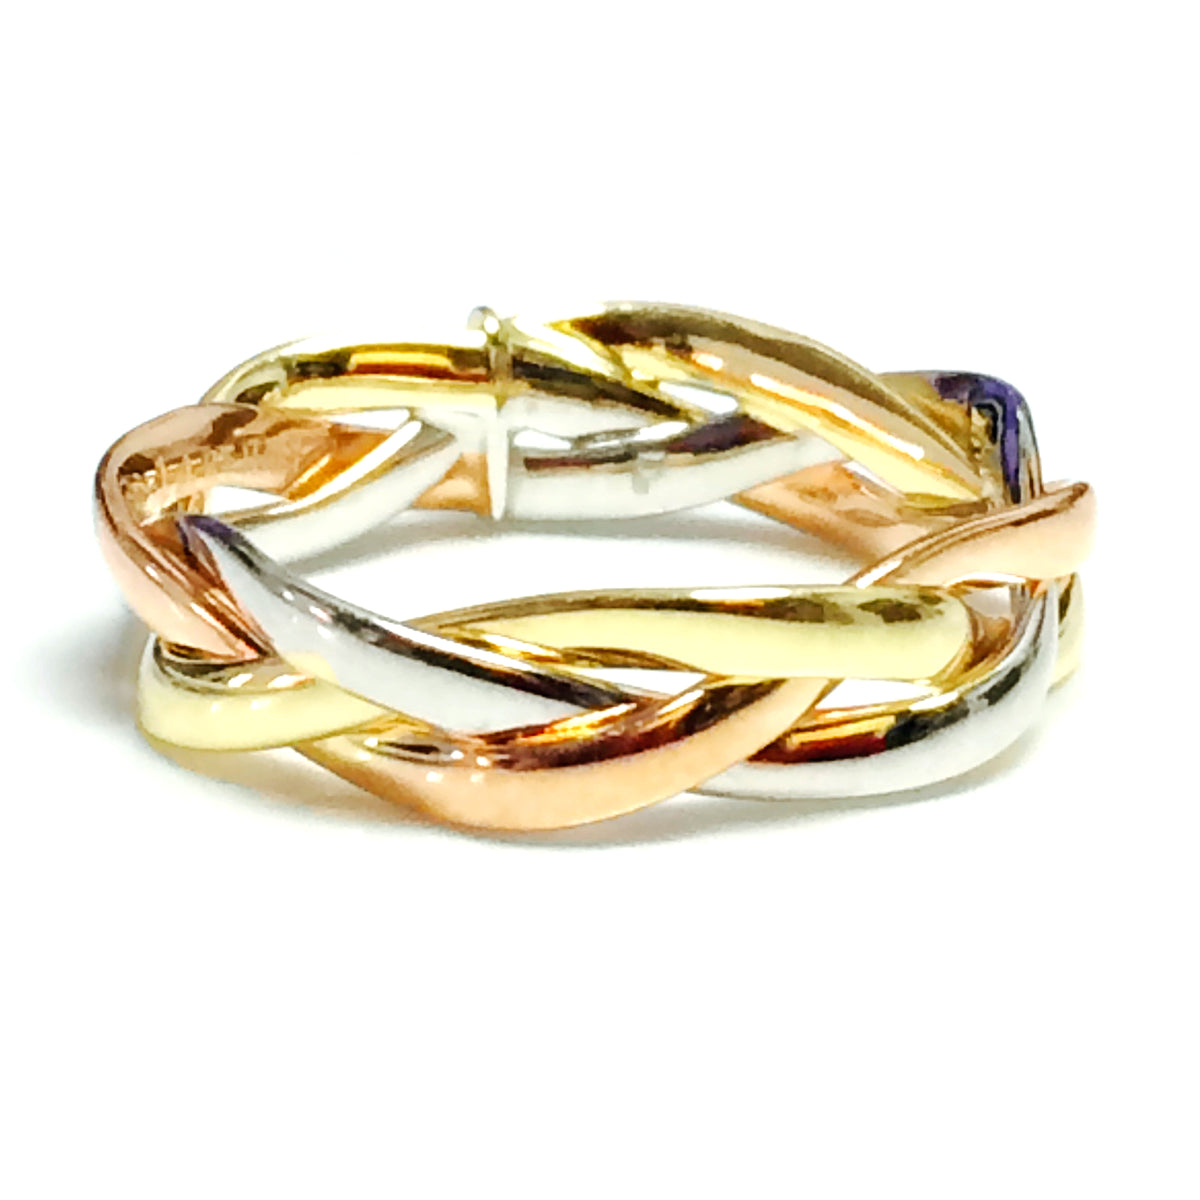 14K Tri-Color Gold Intertwined Braided Ring, 5mm